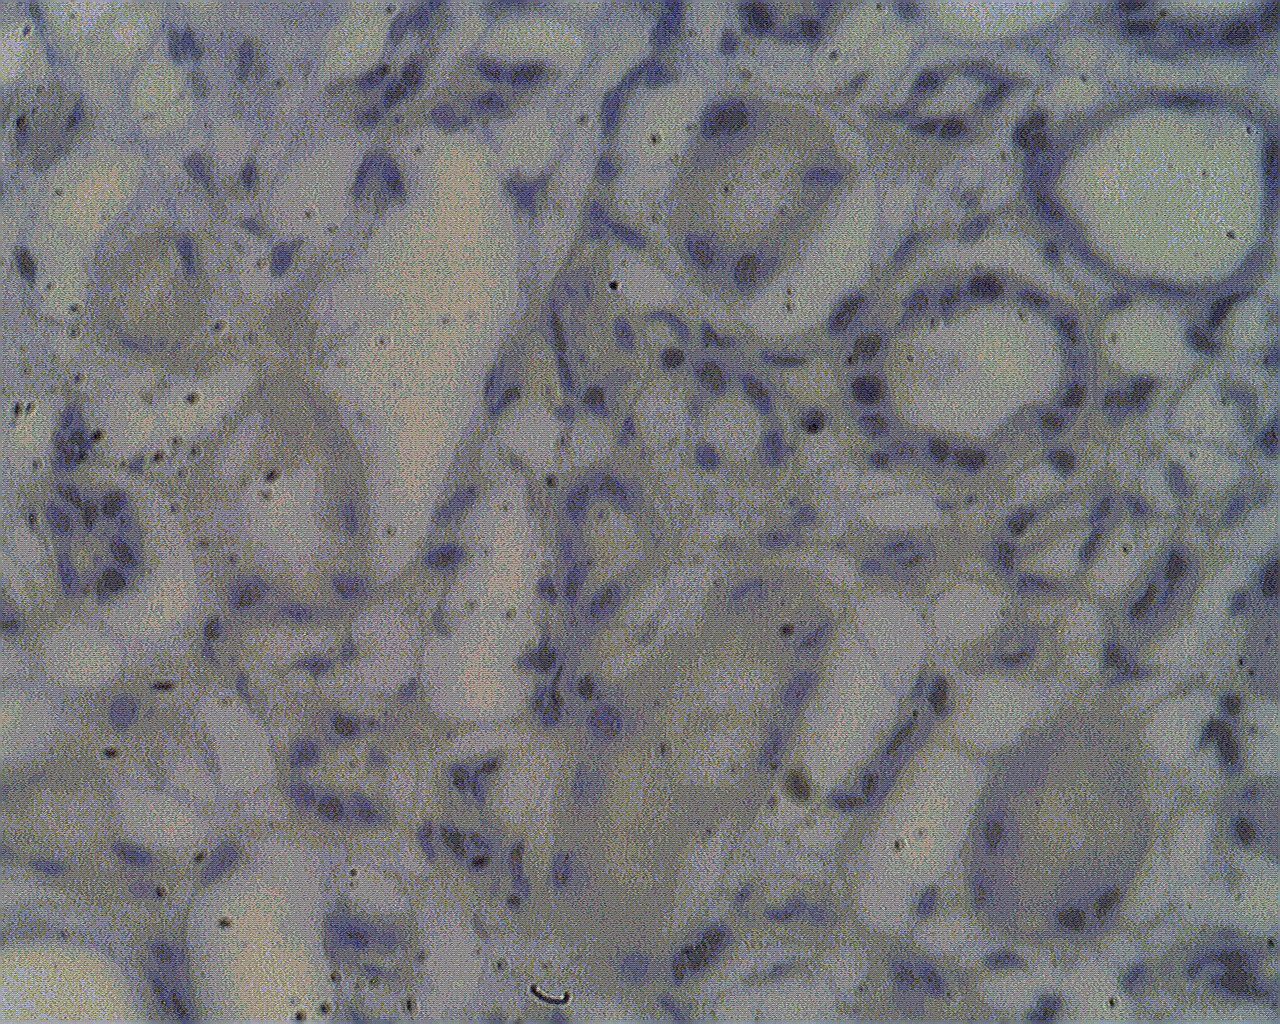 Staining on paraffin embedded normal human kidney sections using NOL4 antibody (Cat. No. X2728P) at 2 µg/ml.  Antigen retrieval used: 10 mM Na Citrate pH 6.0, 10 minutes pressure cooker method, developed with anti rabbit HRP and DAP substrate. Counterstained with methyl blue.